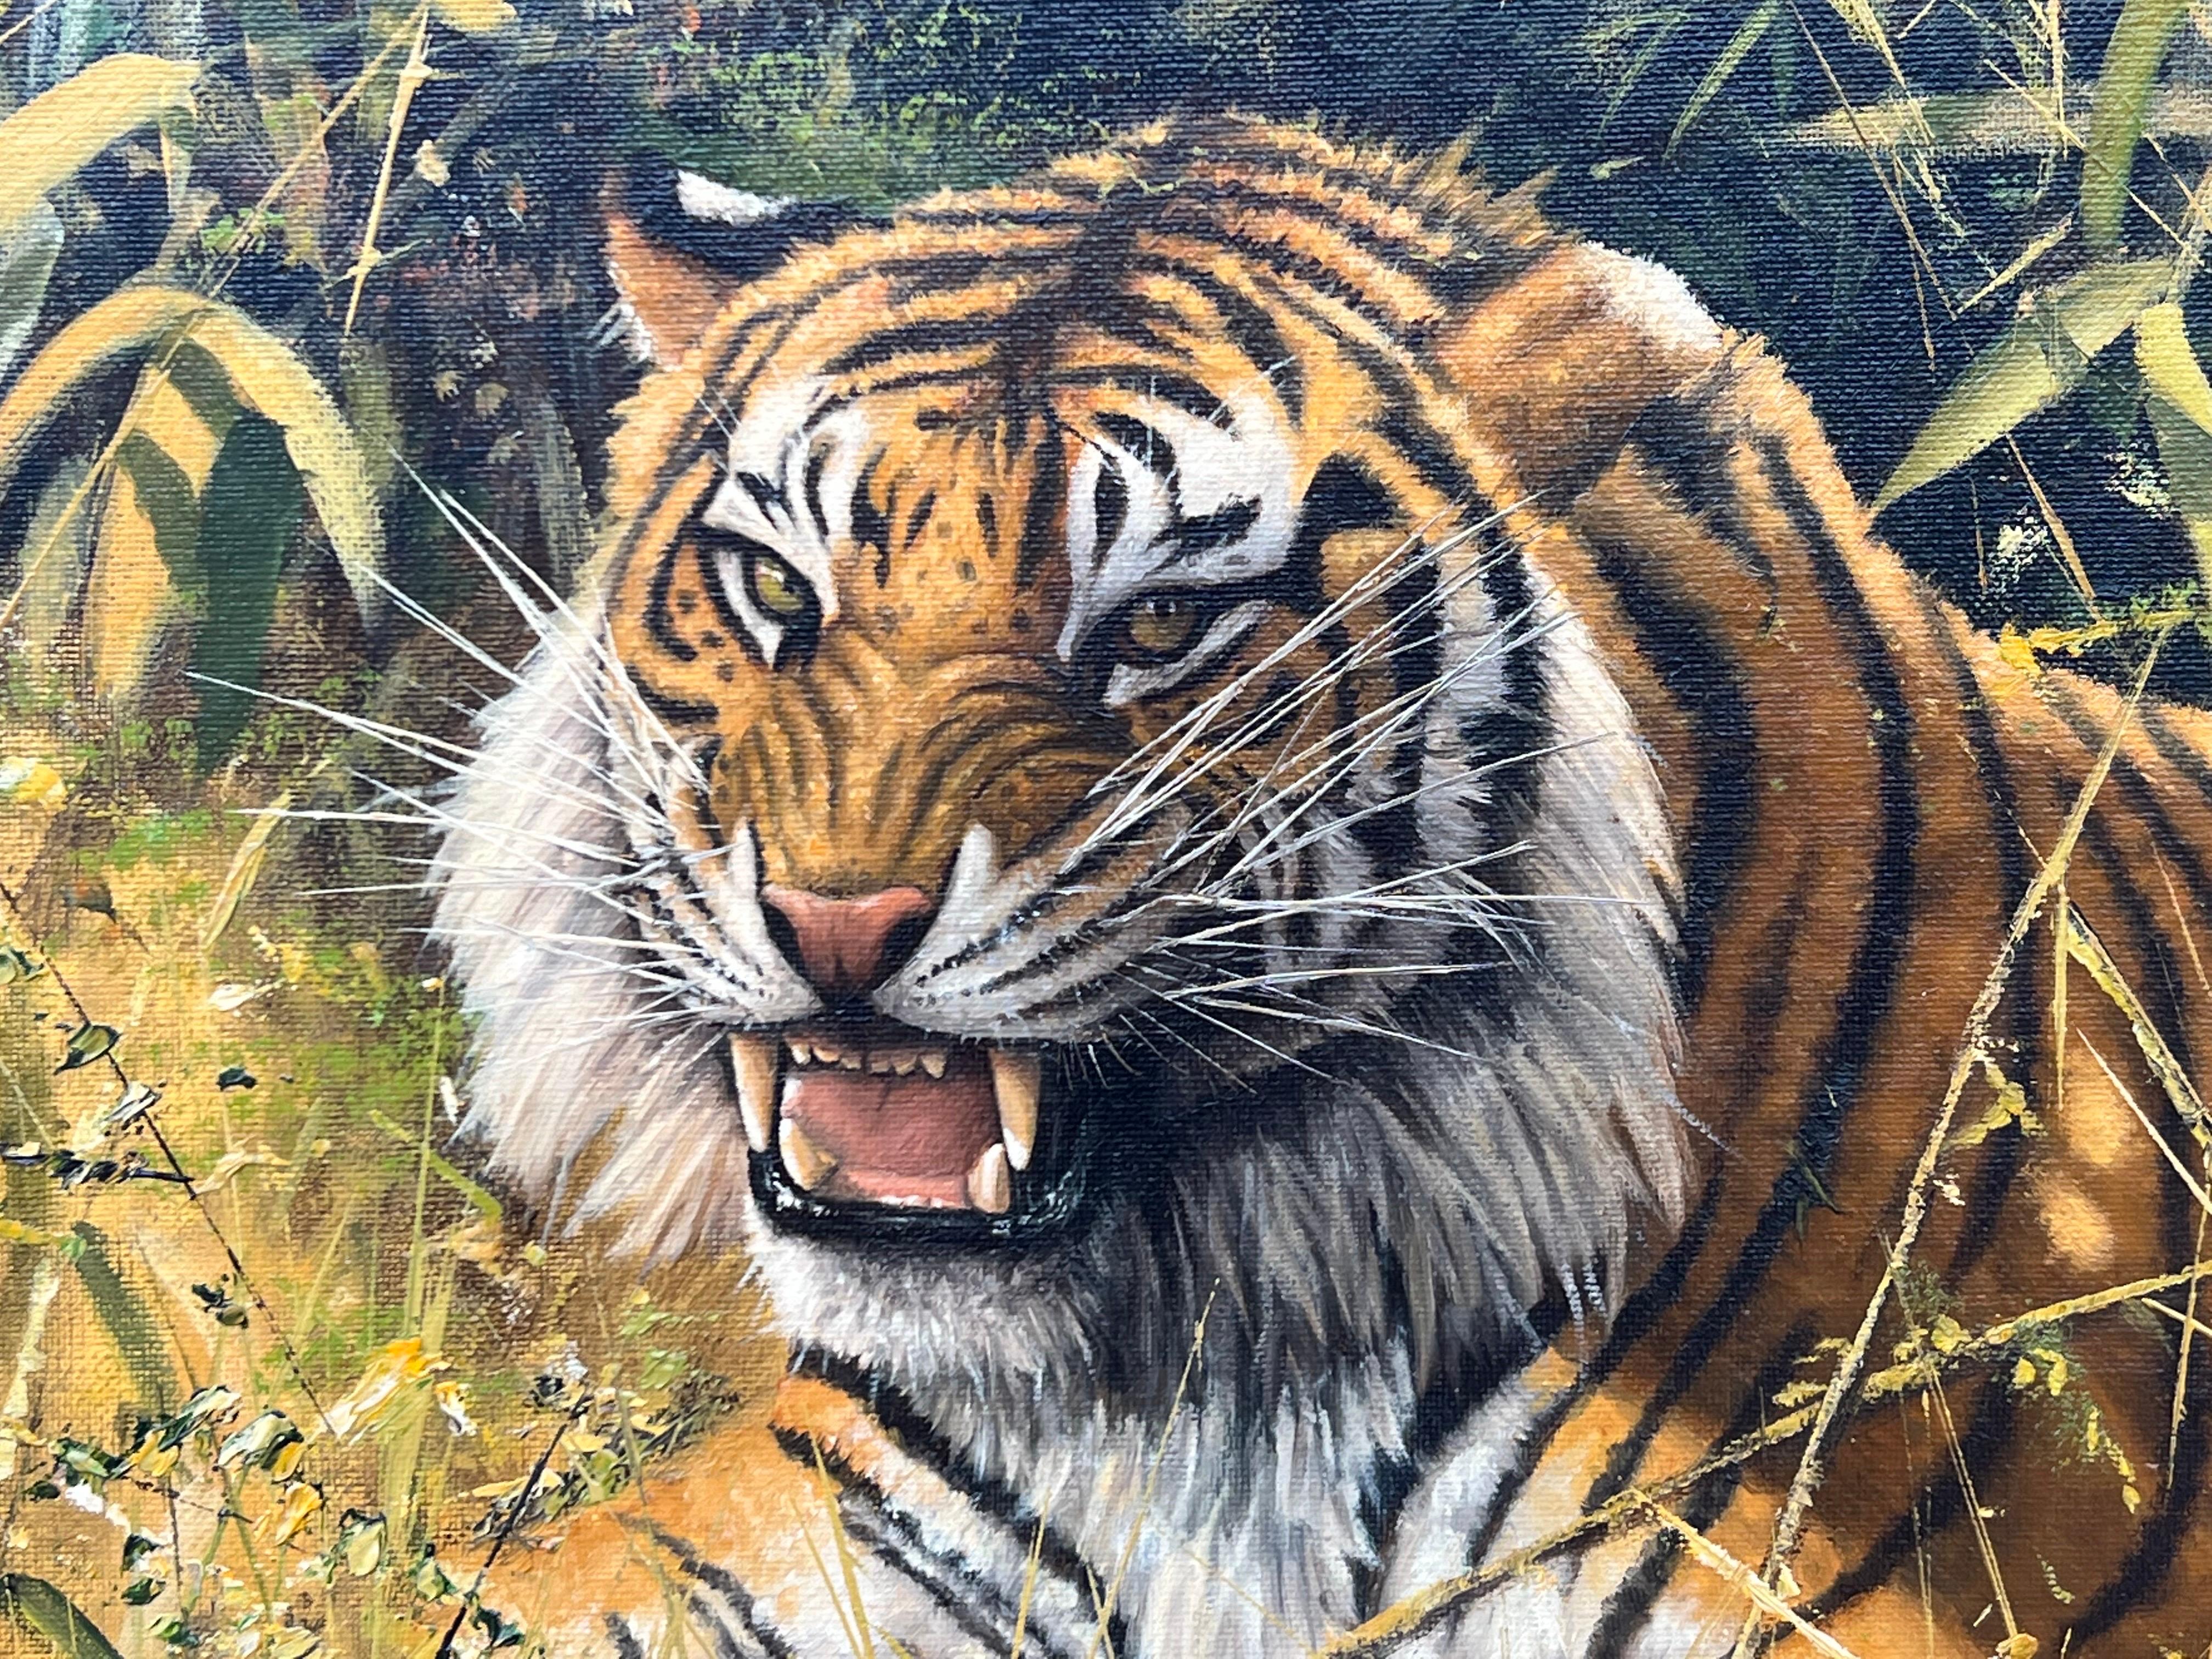 Original Oil Painting of Tiger in the Wild by British Contemporary Artist 2